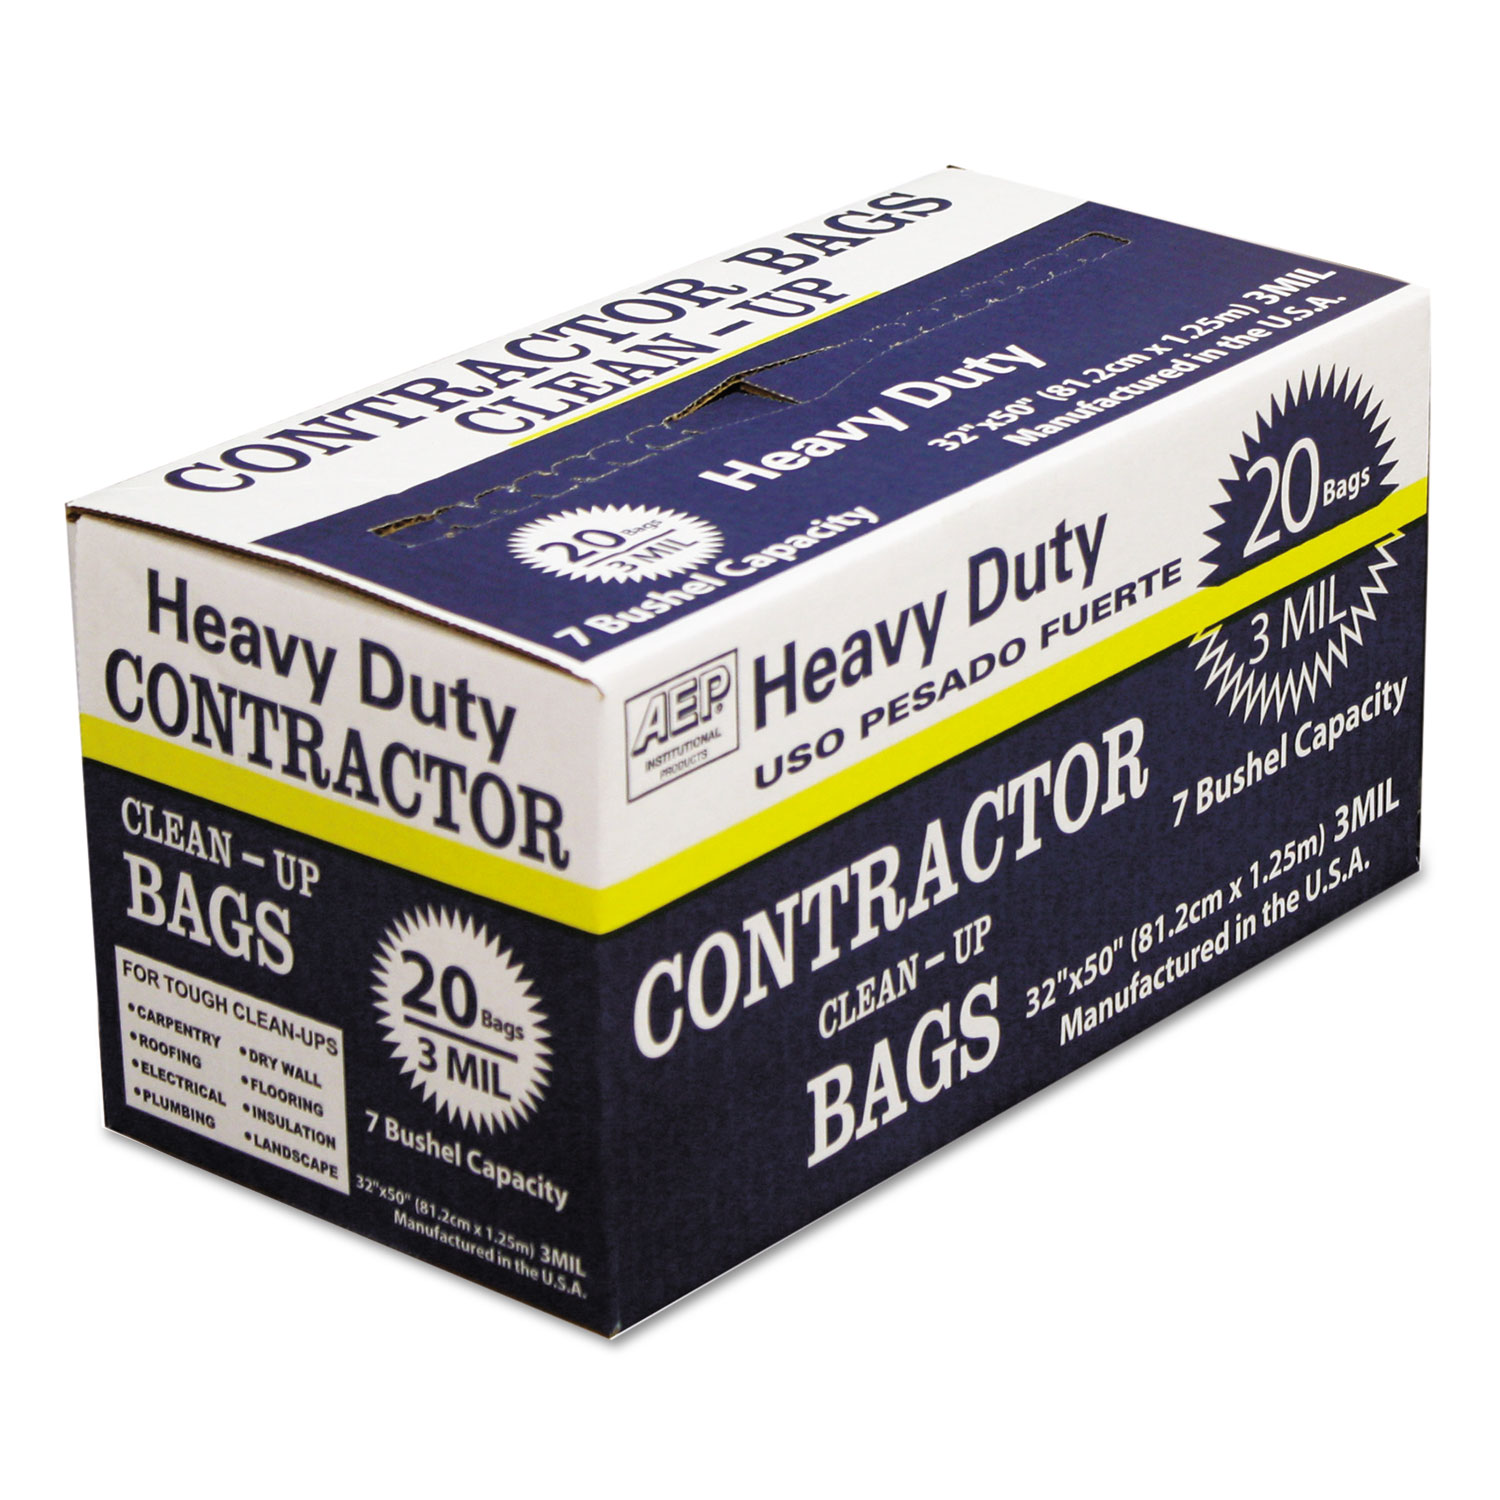 Heavy-Duty Contractor Clean-Up Bags, 55-60 gal, 3 mil, 32 x 50, Black, 20/Carton